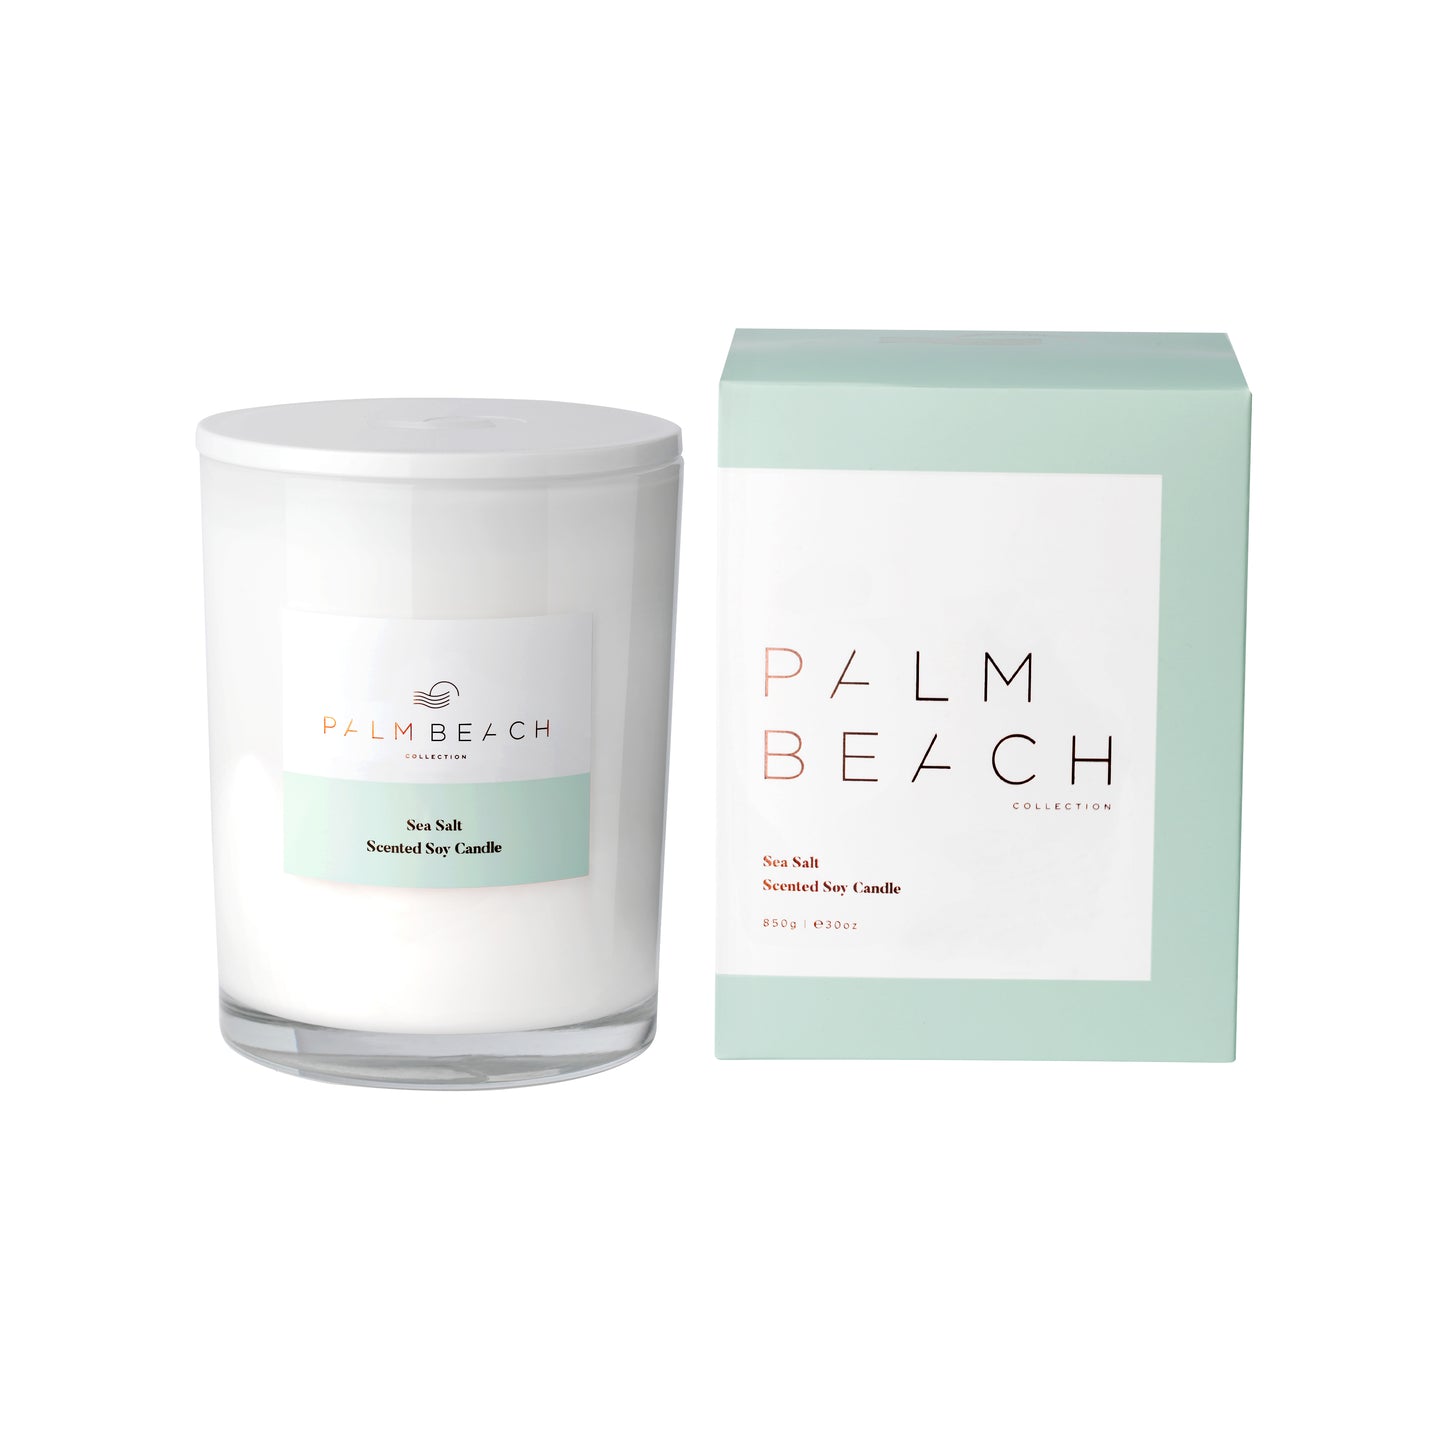 Sea Salt 850g Deluxe Candle